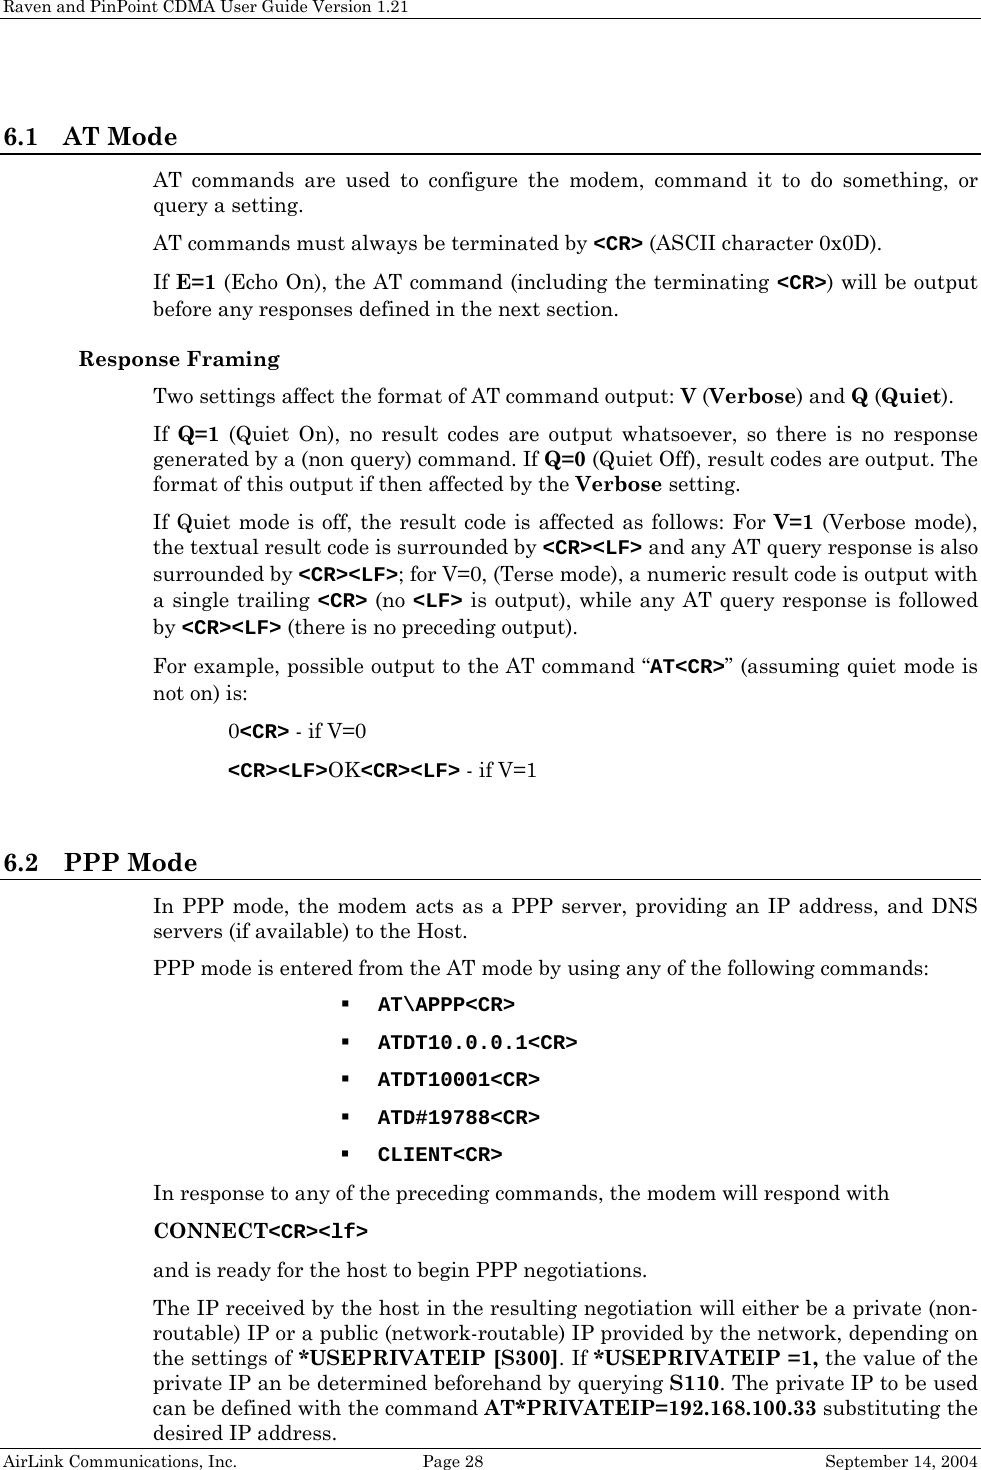 Raven and PinPoint CDMA User Guide Version 1.21 AirLink Communications, Inc.  Page 28  September 14, 2004  6.1 AT Mode AT commands are used to configure the modem, command it to do something, or query a setting.  AT commands must always be terminated by &lt;CR&gt; (ASCII character 0x0D). If E=1 (Echo On), the AT command (including the terminating &lt;CR&gt;) will be output before any responses defined in the next section. Response Framing Two settings affect the format of AT command output: V (Verbose) and Q (Quiet). If  Q=1 (Quiet On), no result codes are output whatsoever, so there is no response generated by a (non query) command. If Q=0 (Quiet Off), result codes are output. The format of this output if then affected by the Verbose setting. If Quiet mode is off, the result code is affected as follows: For V=1 (Verbose mode), the textual result code is surrounded by &lt;CR&gt;&lt;LF&gt; and any AT query response is also surrounded by &lt;CR&gt;&lt;LF&gt;; for V=0, (Terse mode), a numeric result code is output with a single trailing &lt;CR&gt; (no &lt;LF&gt; is output), while any AT query response is followed by &lt;CR&gt;&lt;LF&gt; (there is no preceding output). For example, possible output to the AT command “AT&lt;CR&gt;” (assuming quiet mode is not on) is:  0&lt;CR&gt; - if V=0  &lt;CR&gt;&lt;LF&gt;OK&lt;CR&gt;&lt;LF&gt; - if V=1  6.2 PPP Mode In PPP mode, the modem acts as a PPP server, providing an IP address, and DNS servers (if available) to the Host. PPP mode is entered from the AT mode by using any of the following commands:  AT\APPP&lt;CR&gt;  ATDT10.0.0.1&lt;CR&gt;  ATDT10001&lt;CR&gt;  ATD#19788&lt;CR&gt;  CLIENT&lt;CR&gt; In response to any of the preceding commands, the modem will respond with  CONNECT&lt;CR&gt;&lt;lf&gt; and is ready for the host to begin PPP negotiations. The IP received by the host in the resulting negotiation will either be a private (non-routable) IP or a public (network-routable) IP provided by the network, depending on the settings of *USEPRIVATEIP [S300]. If *USEPRIVATEIP =1, the value of the private IP an be determined beforehand by querying S110. The private IP to be used can be defined with the command AT*PRIVATEIP=192.168.100.33 substituting the desired IP address. 